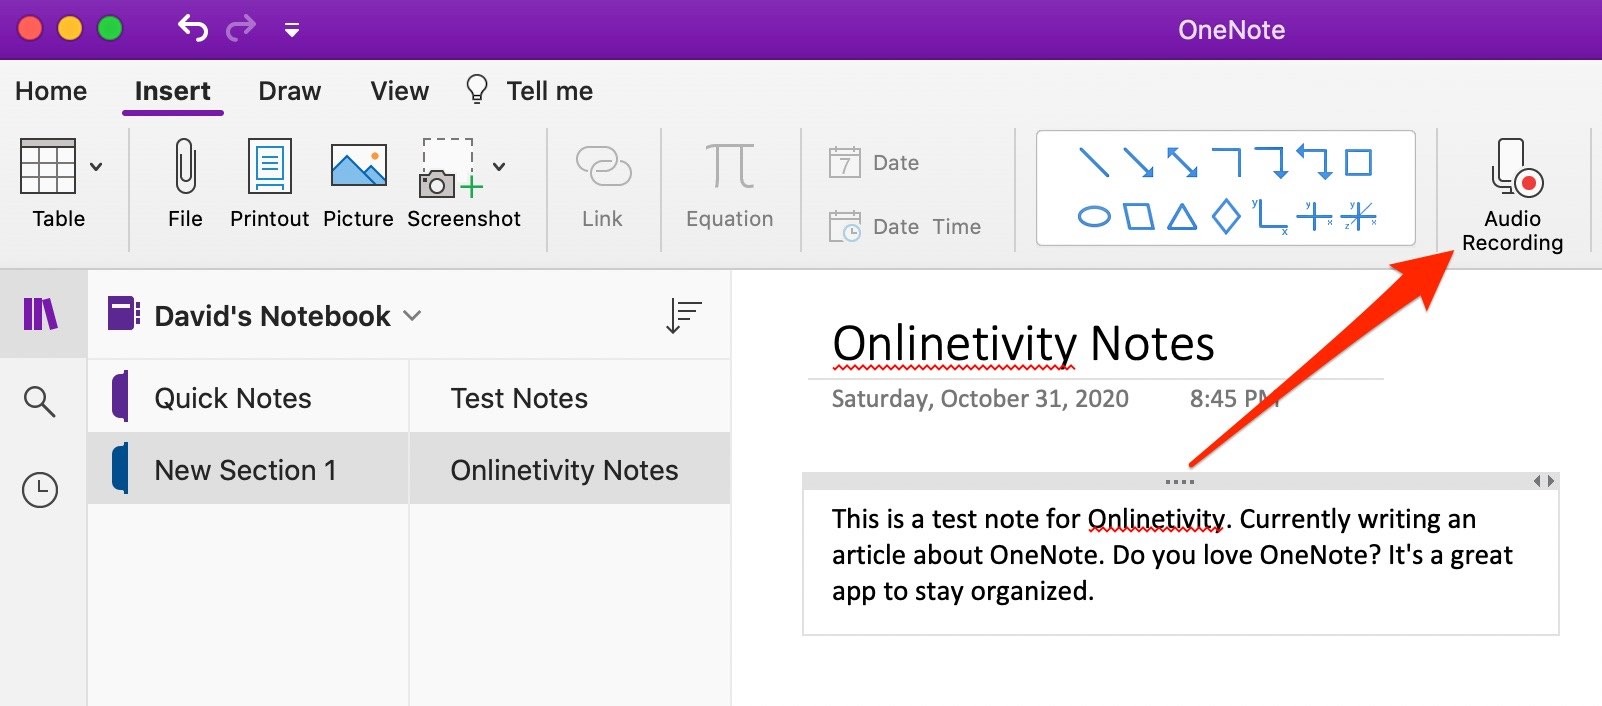 Stay Organized With Onenote Record Audio 1